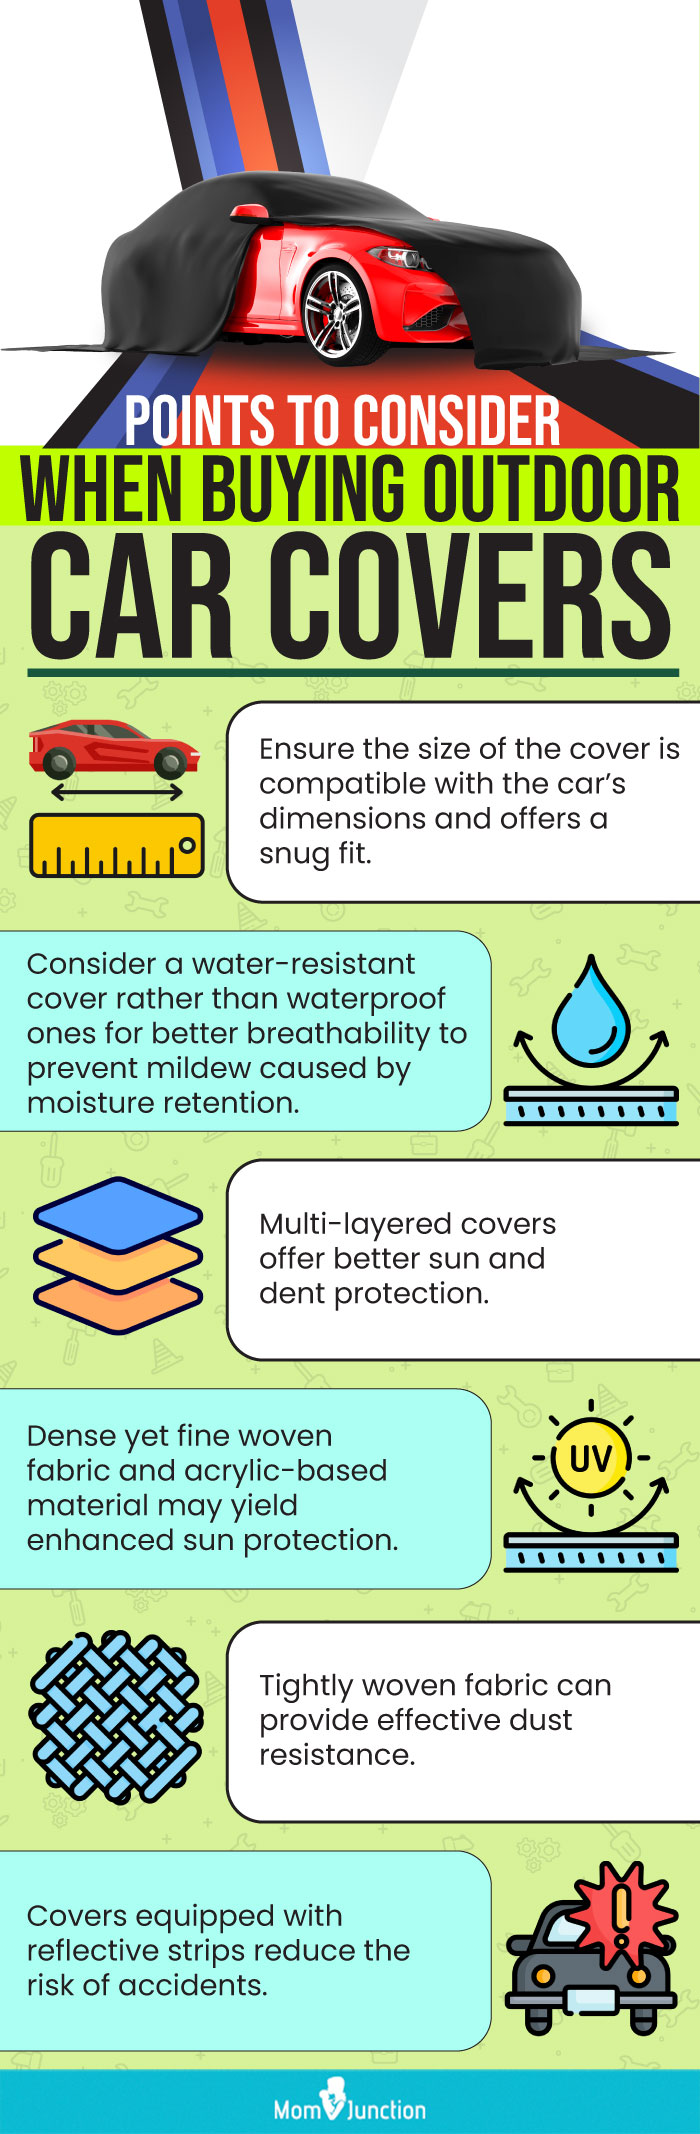 Points To Consider When Buying Outdoor Car Covers (Infographic)